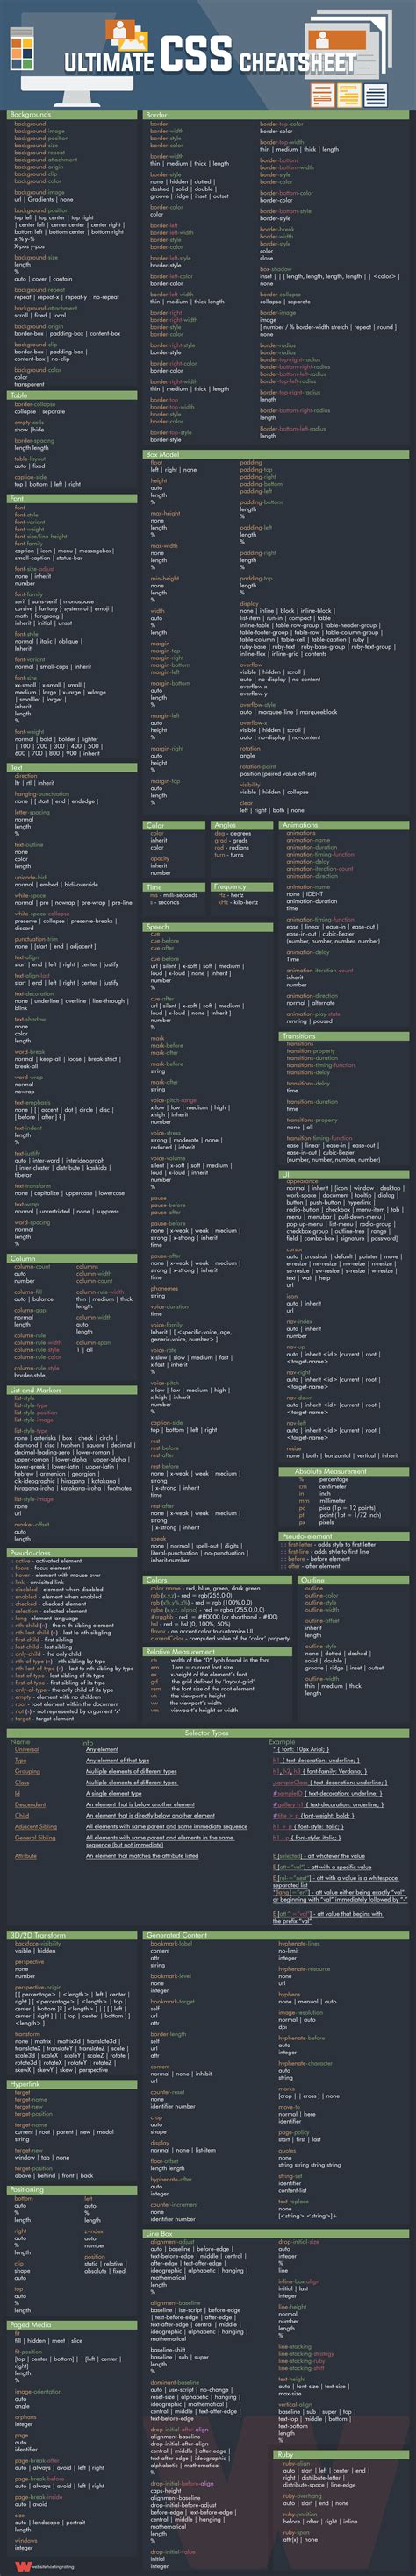 Html Css و Php The Ultimate Cheat Sheet تنزيل مجاني